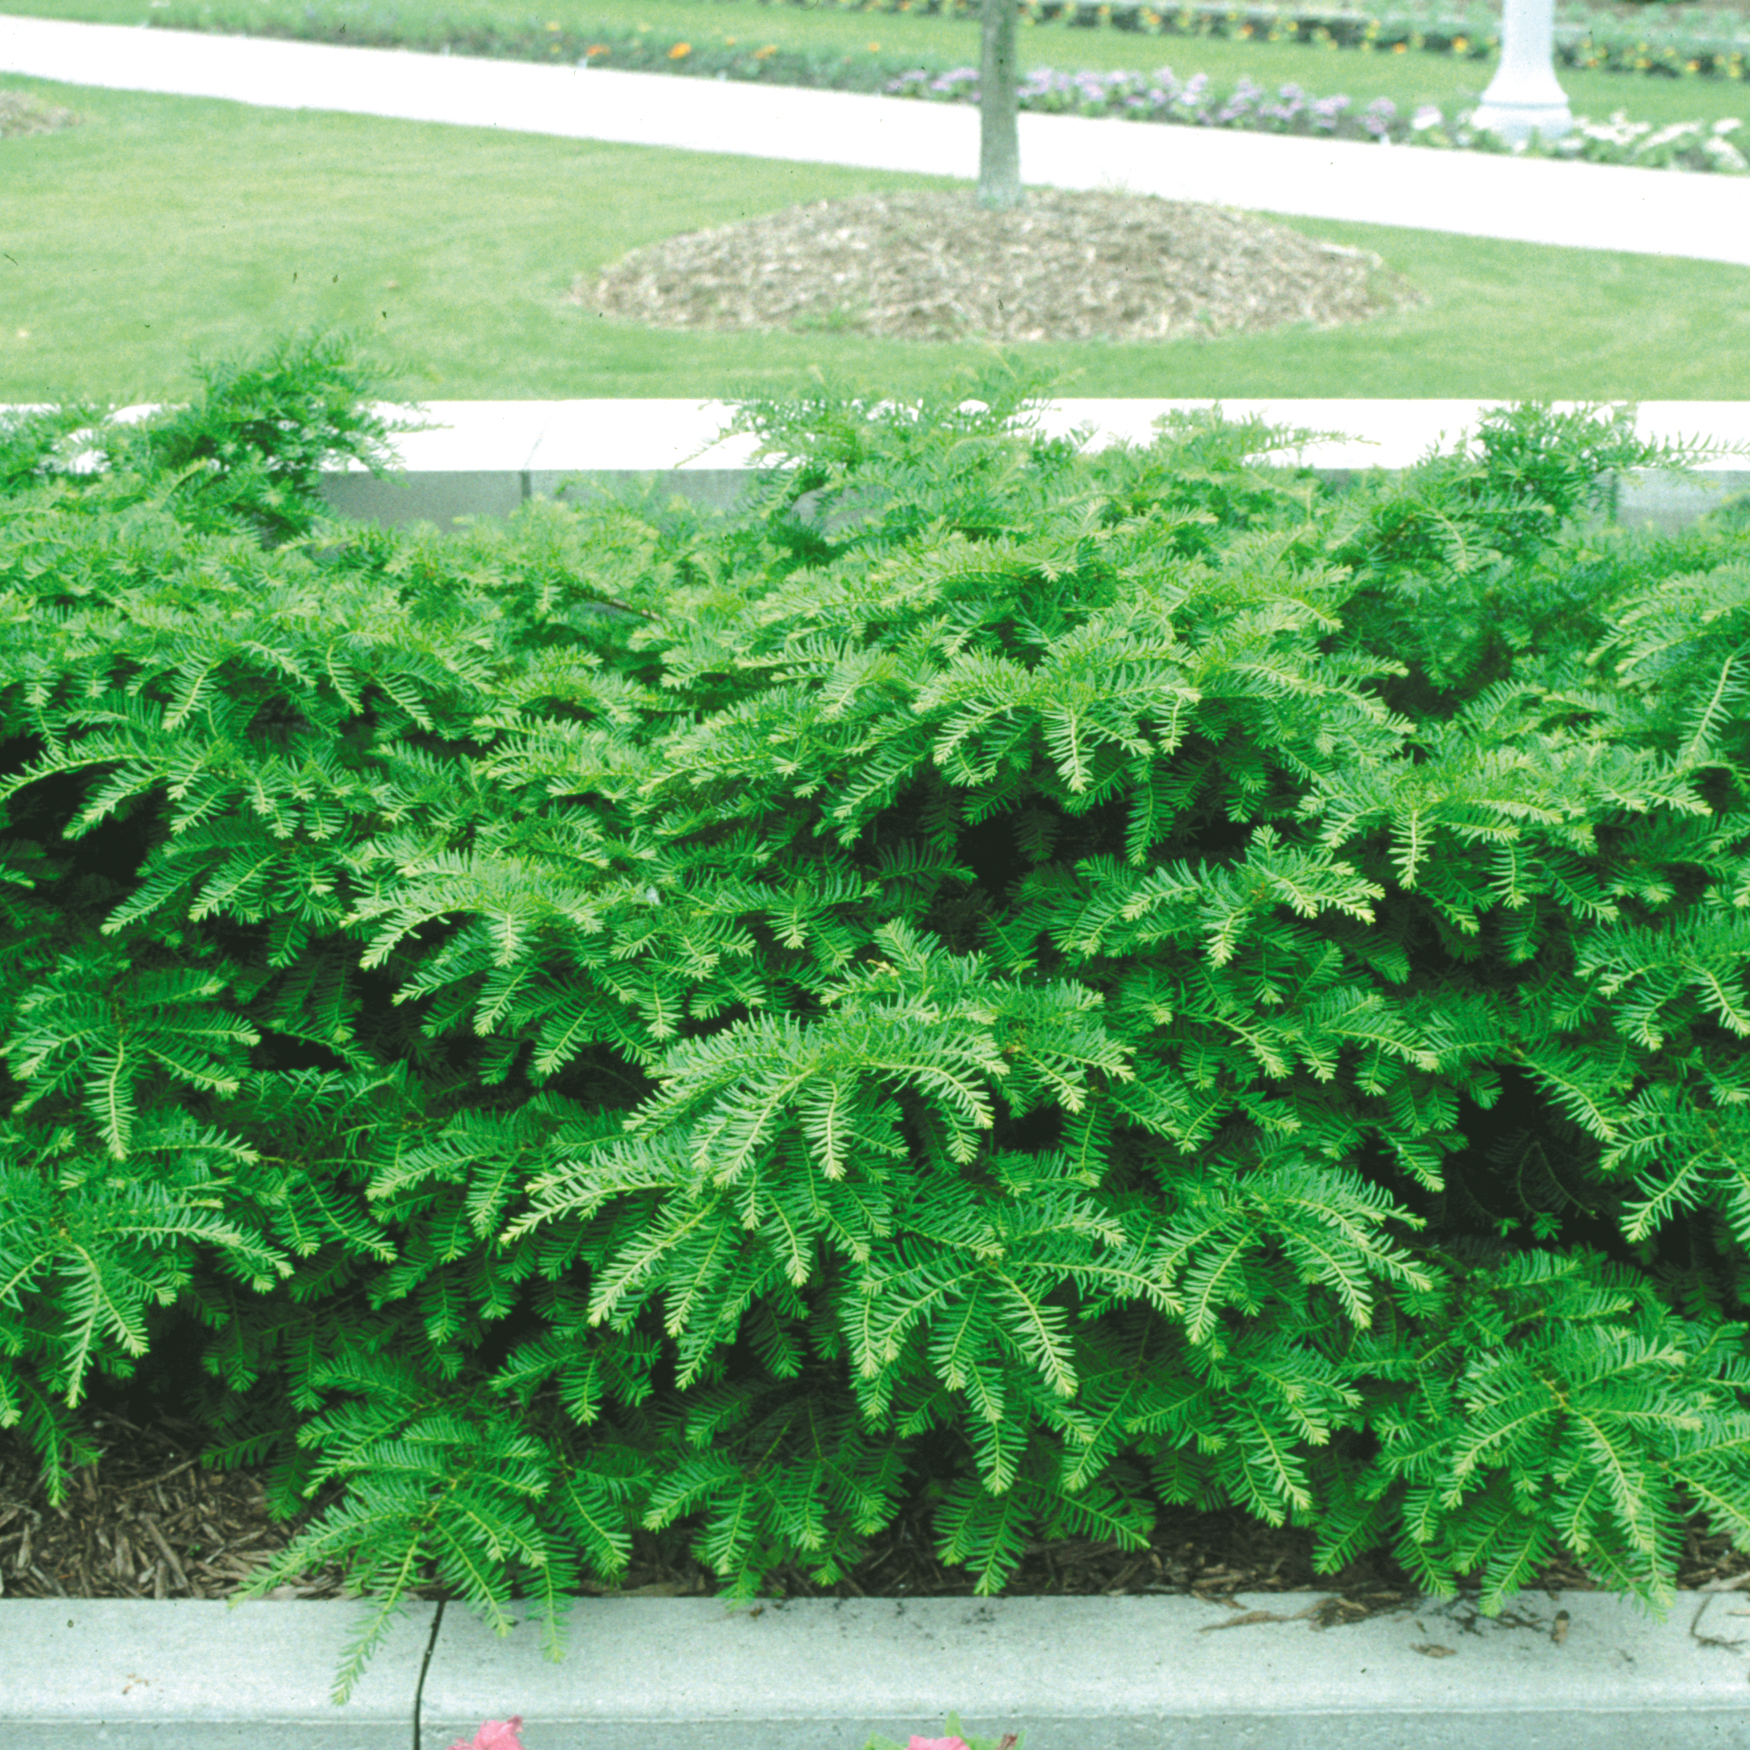 Green Wave yew in a landscape